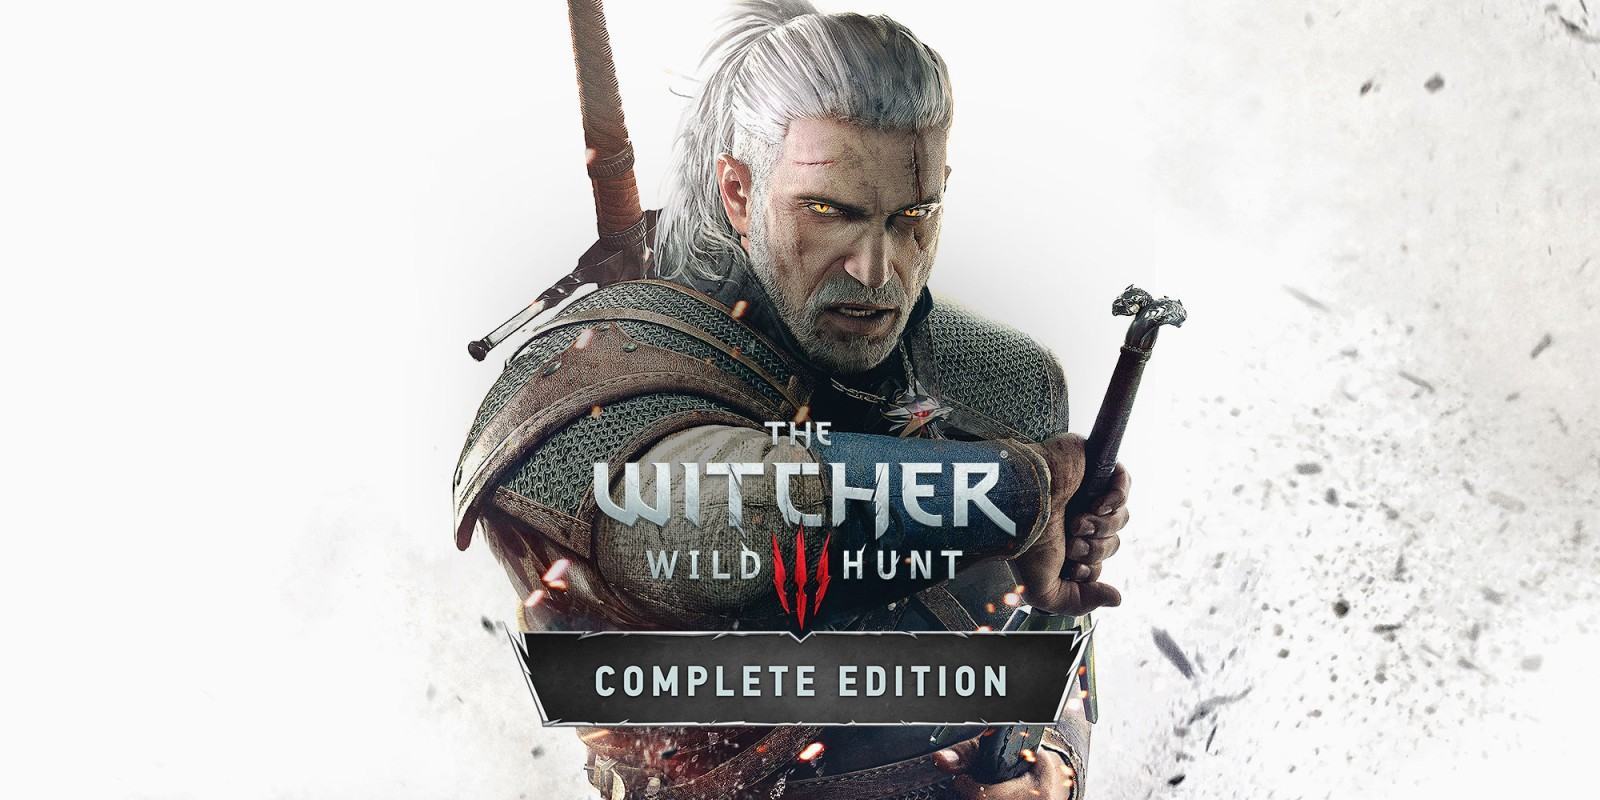 H2x1_NSwitch_TheWitcher3WildHuntCompleteEdition_enGB_image1600w.jpg